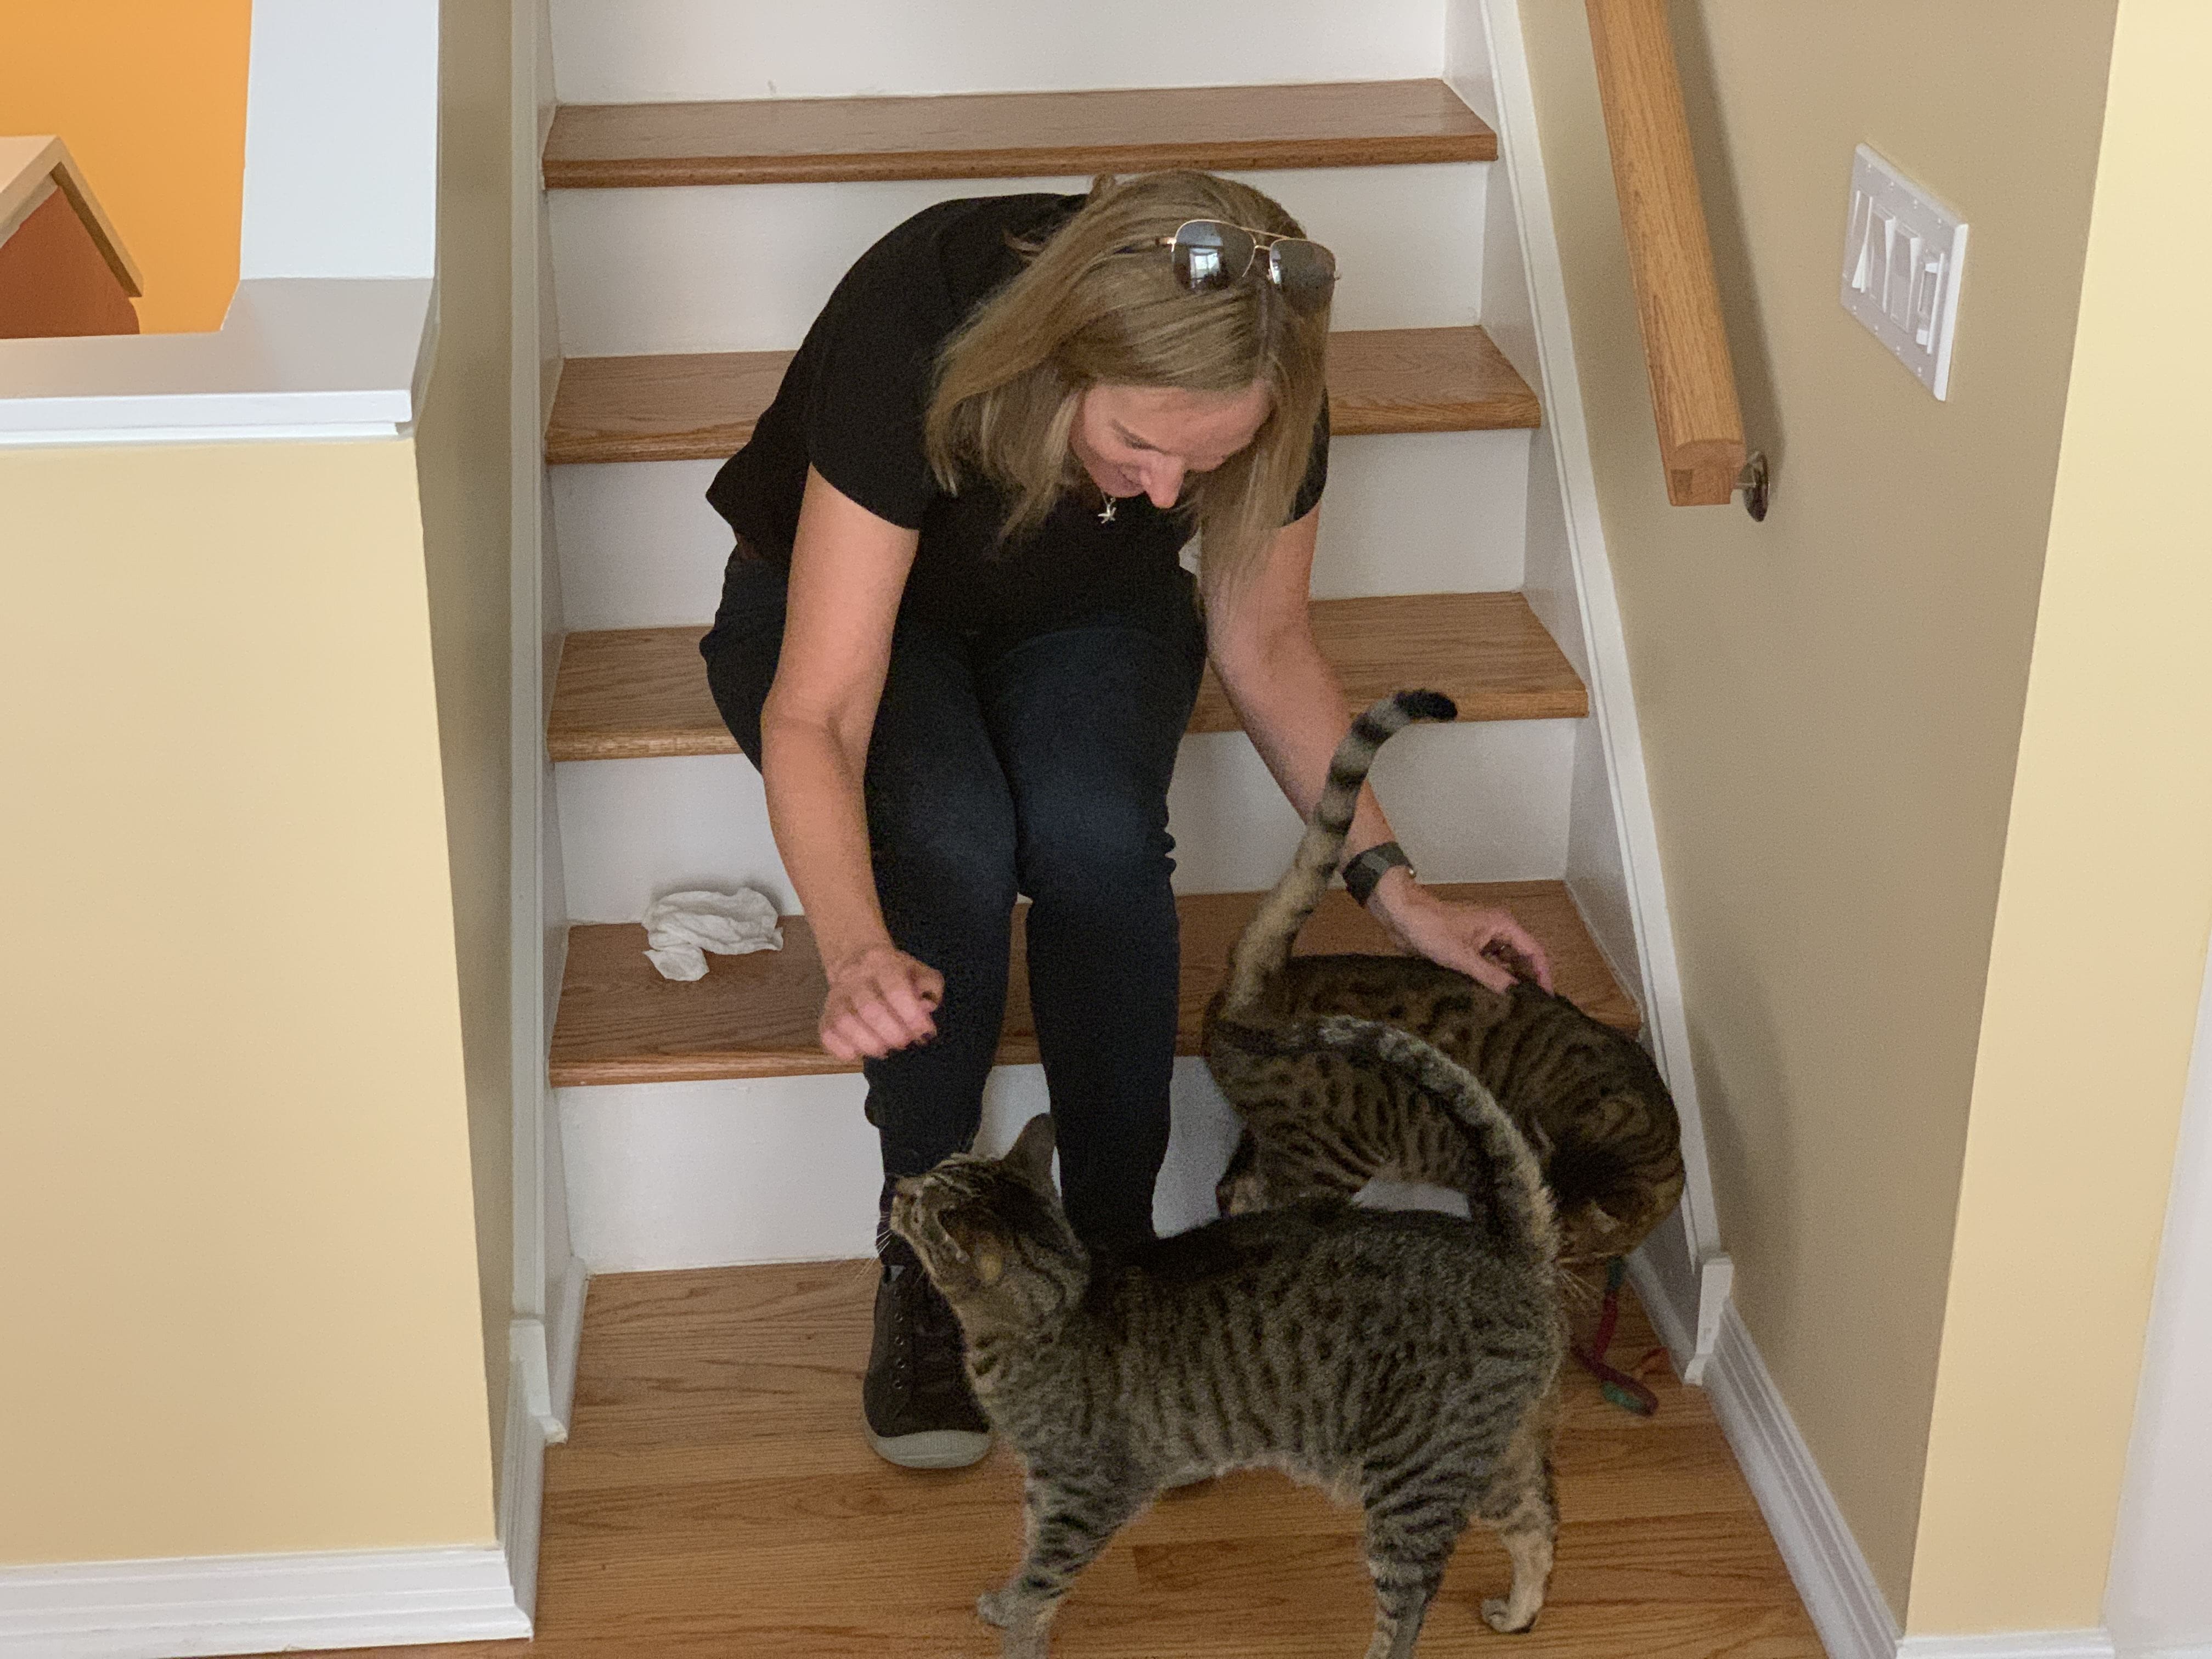 Trusted Housesitters petting the cat